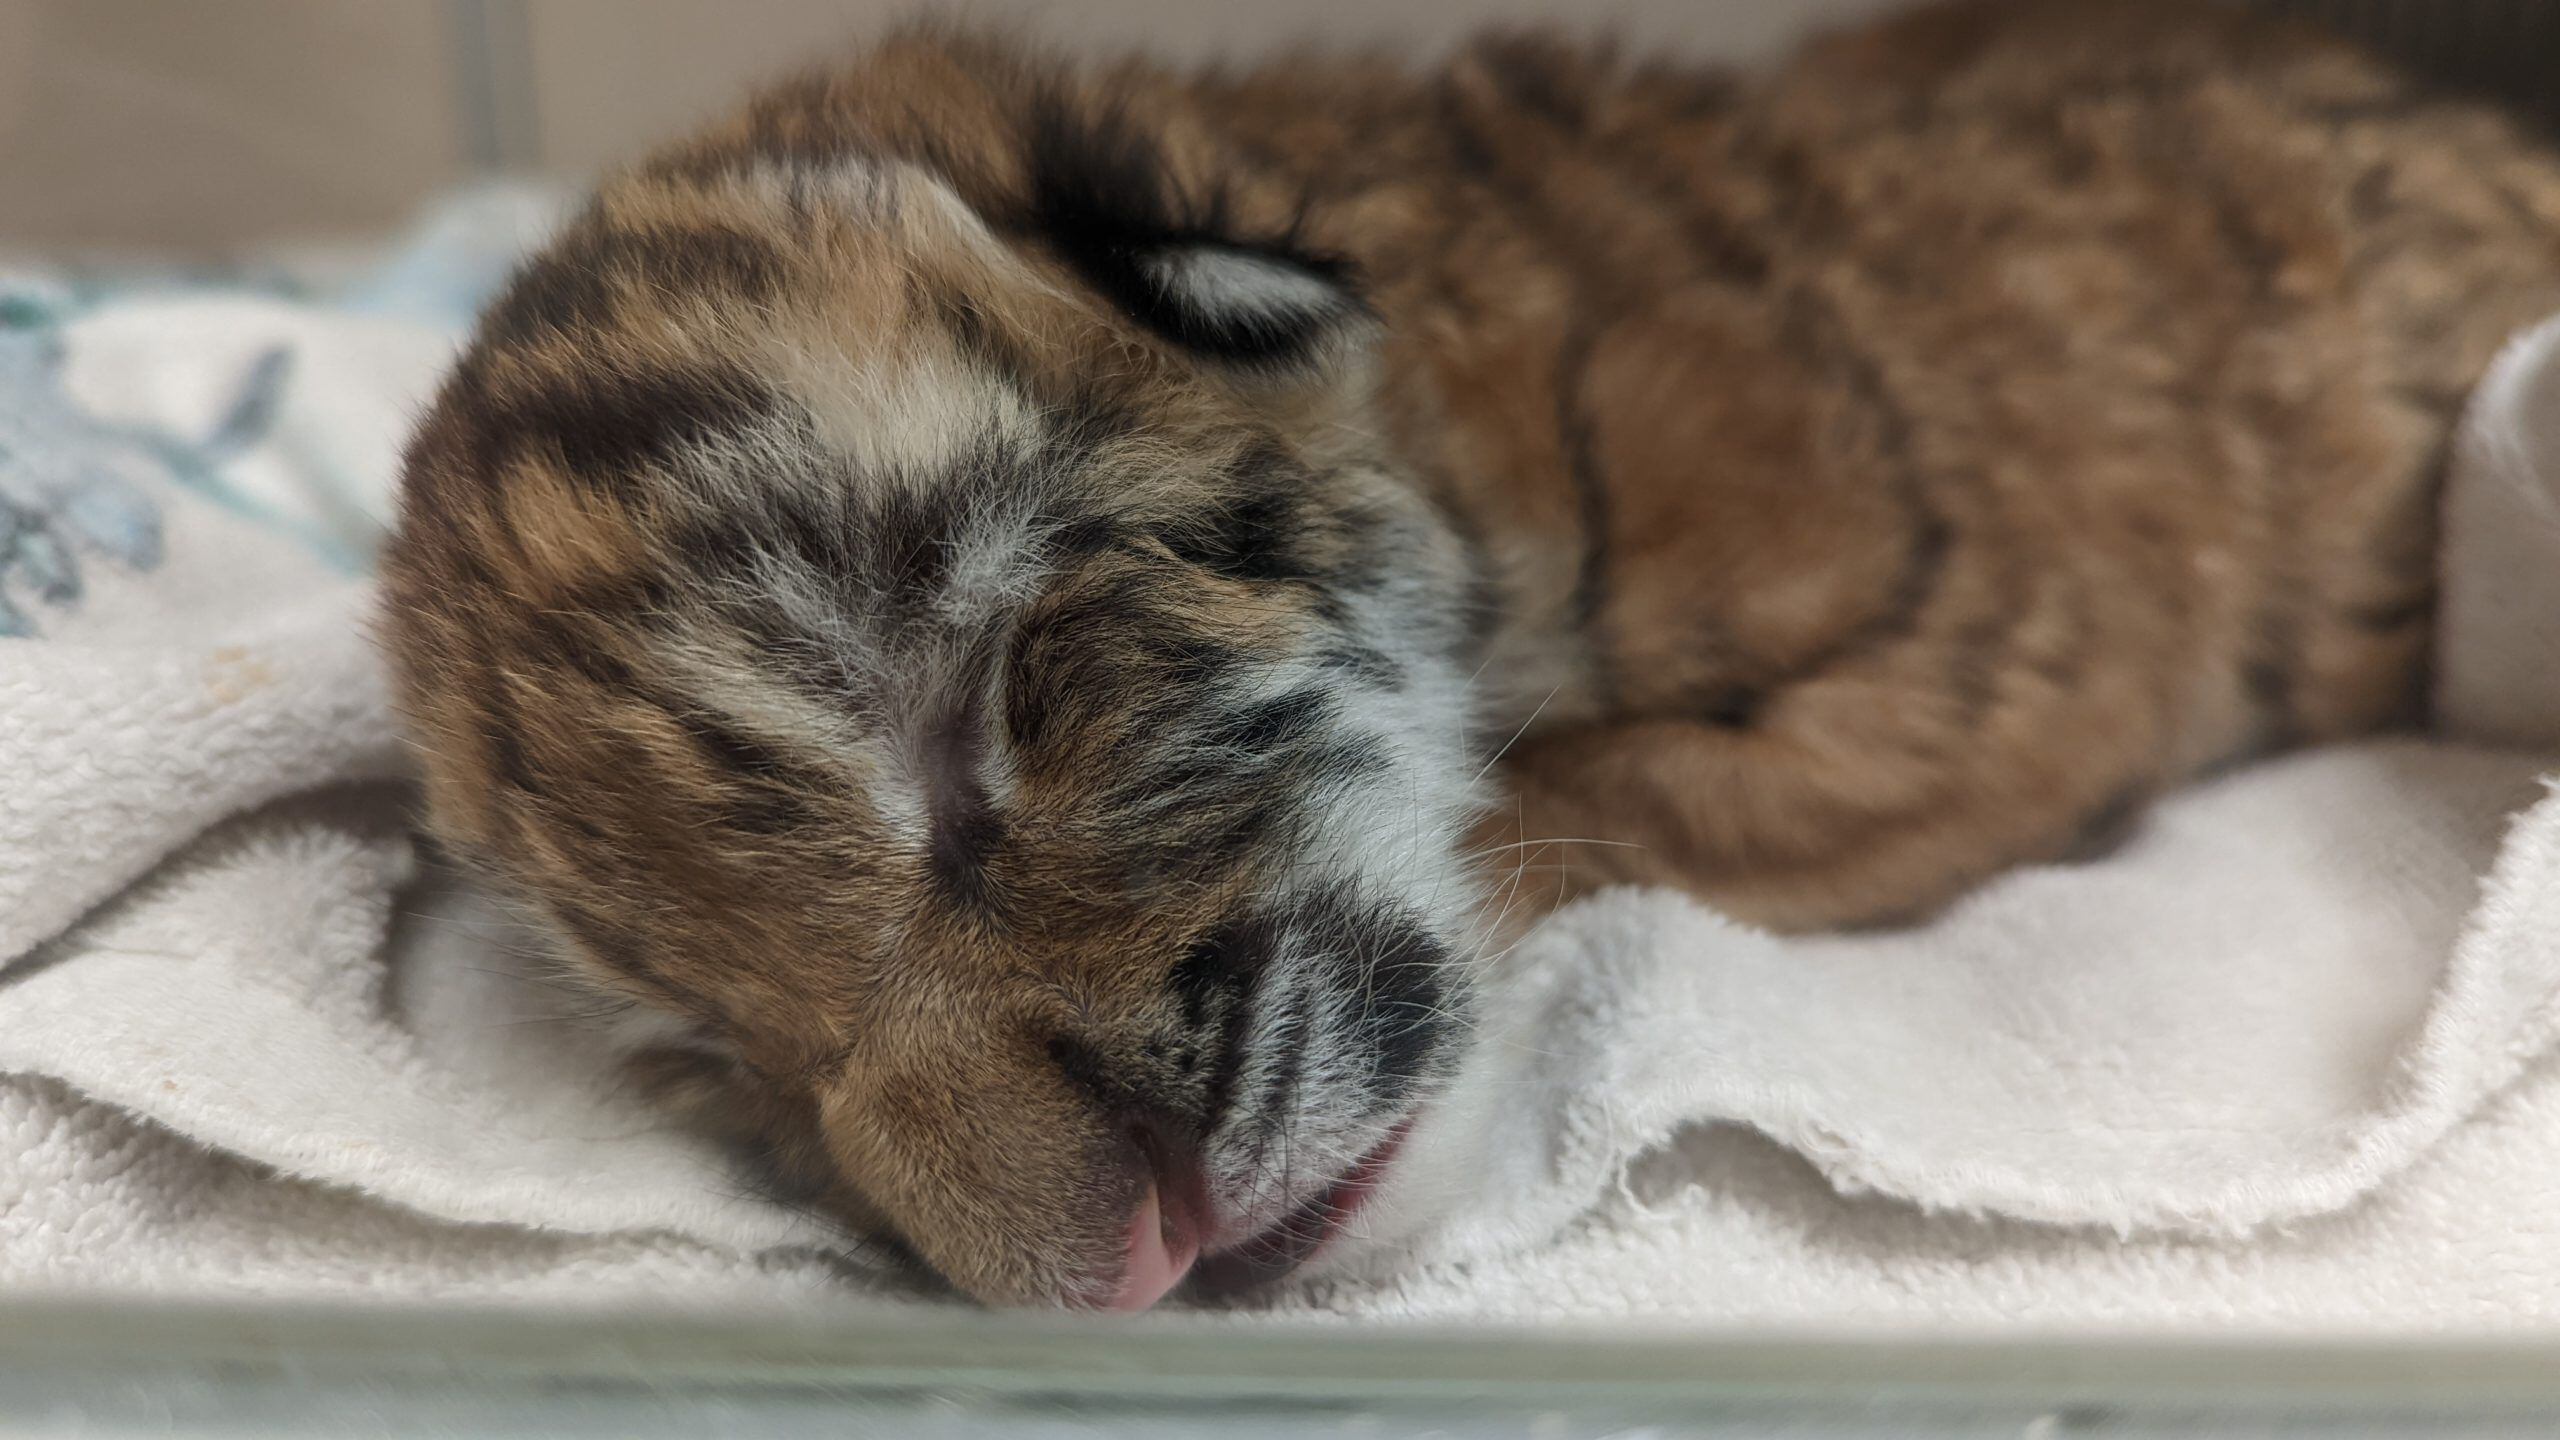 Rare tiger twins being hand-raised at Pittsburgh zoo – East Bay Times